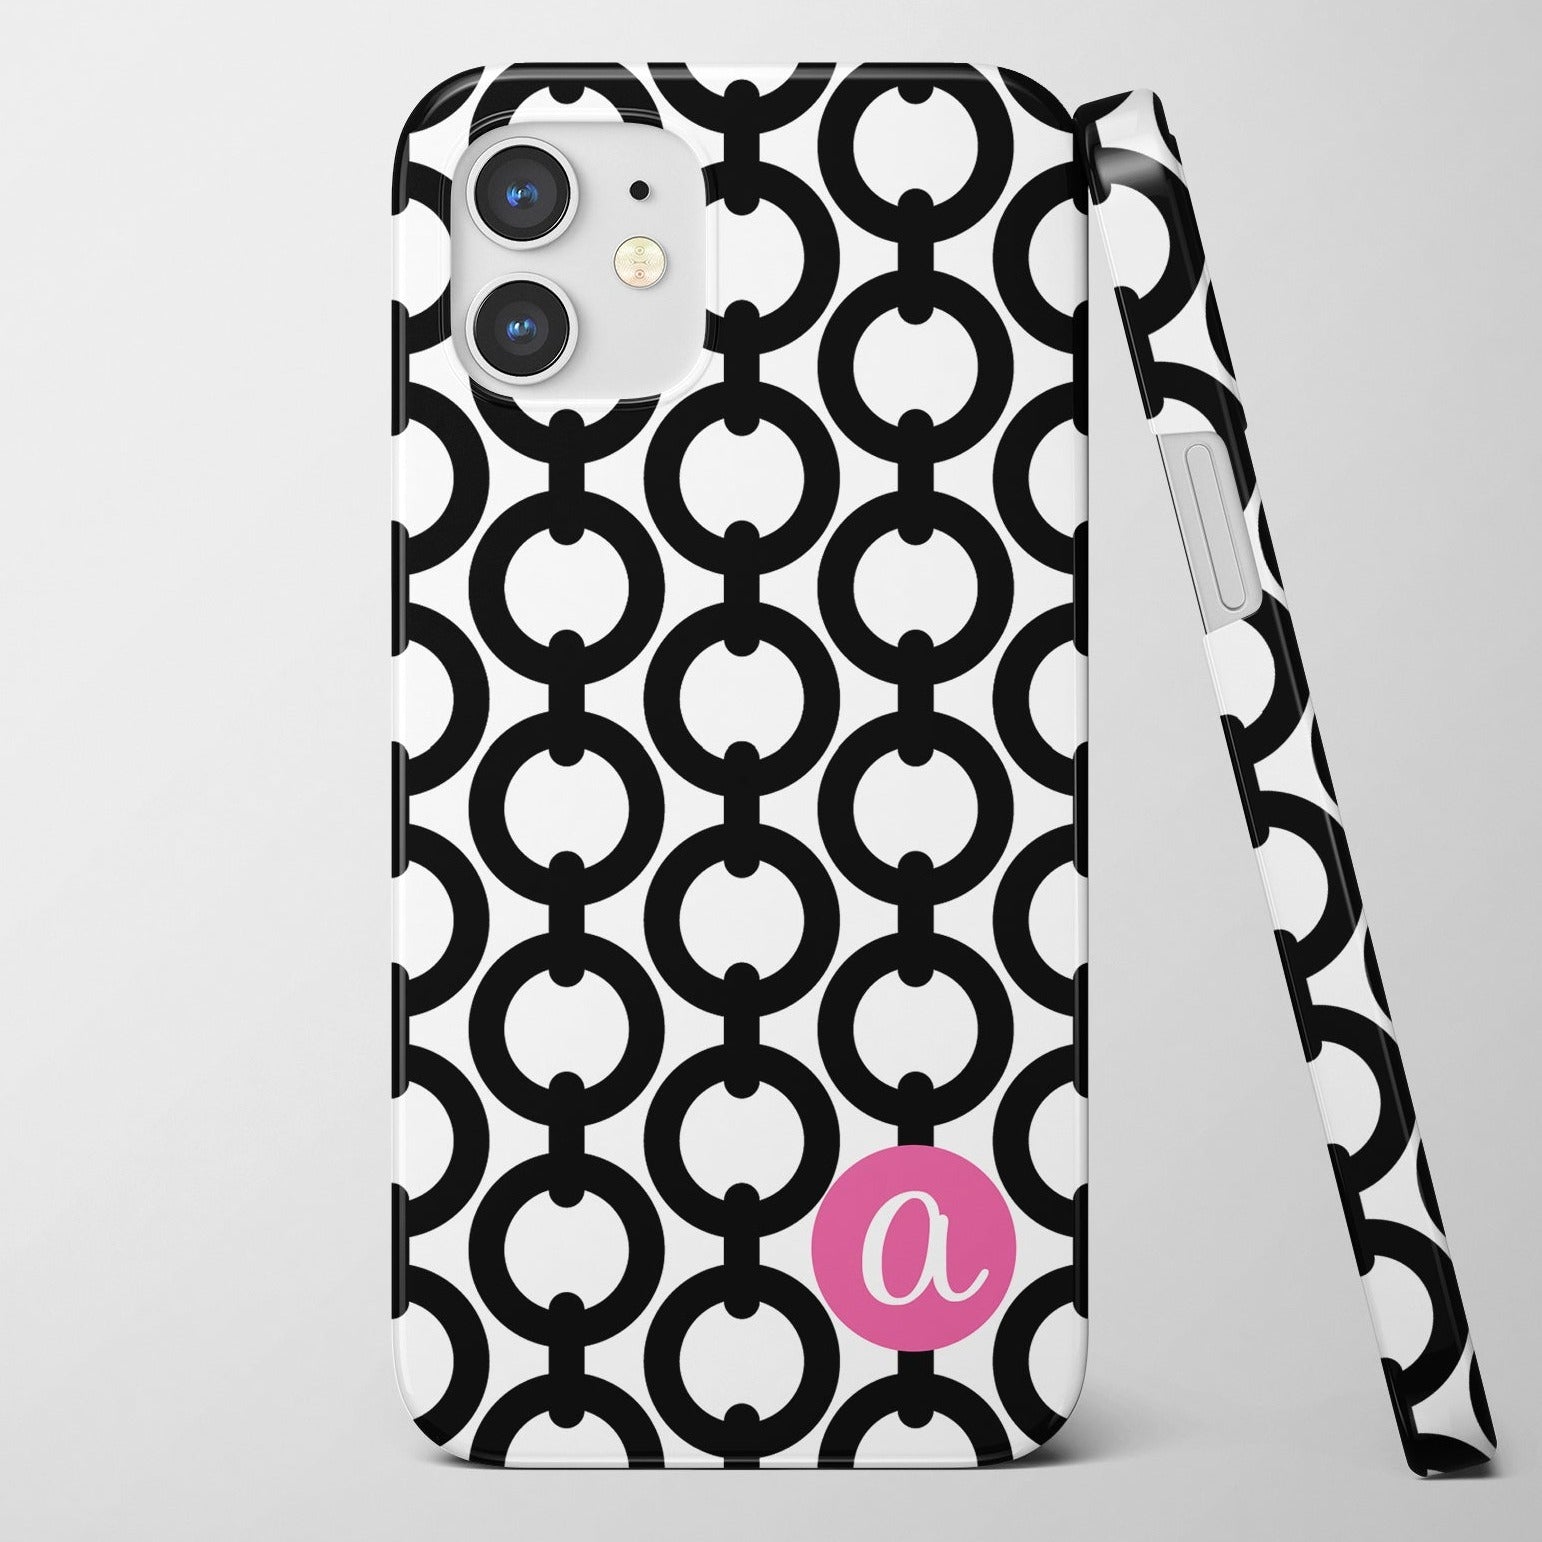 Premium iPhone case with a modern chain pattern, personalized with your initial, Pipsy.com